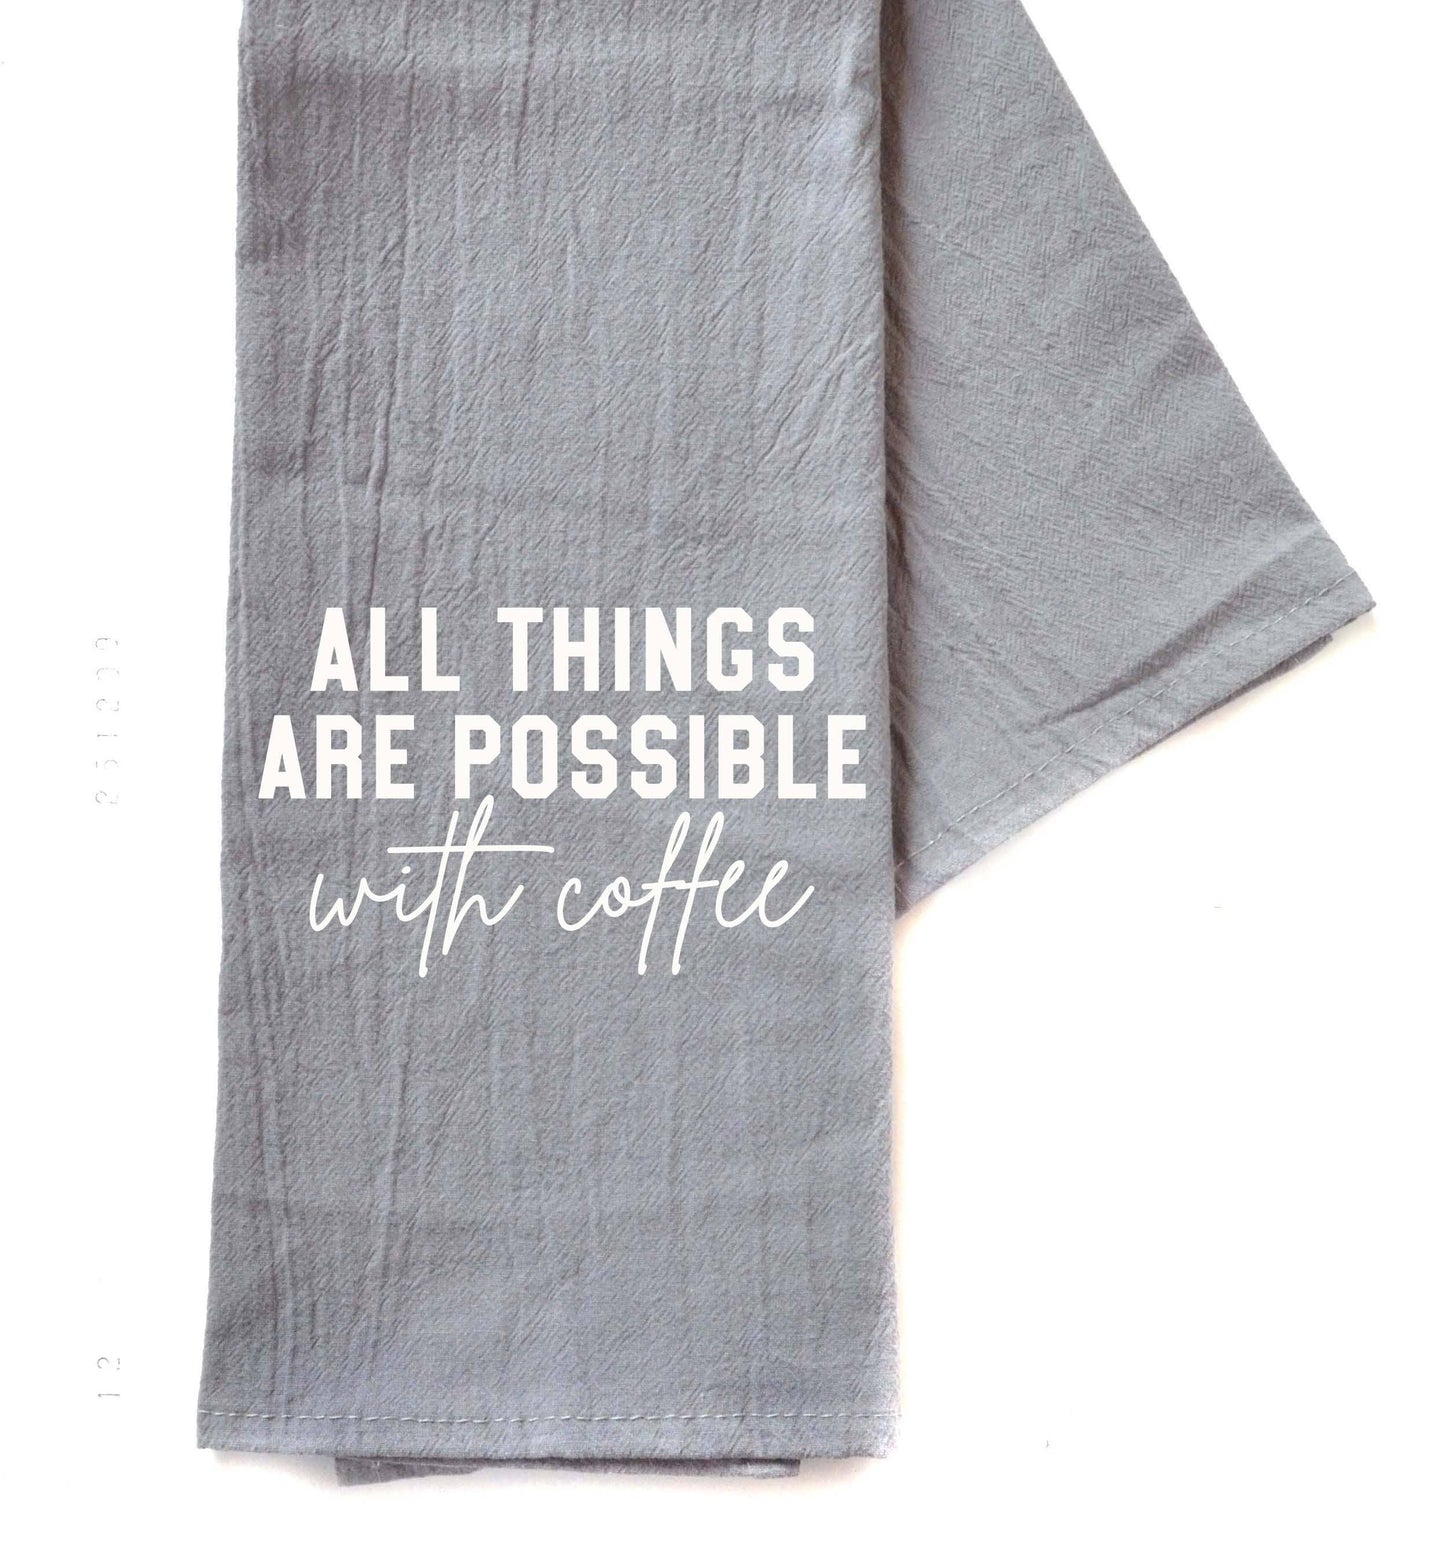 All Things Are Possible with Coffee - Gray Hand Towel